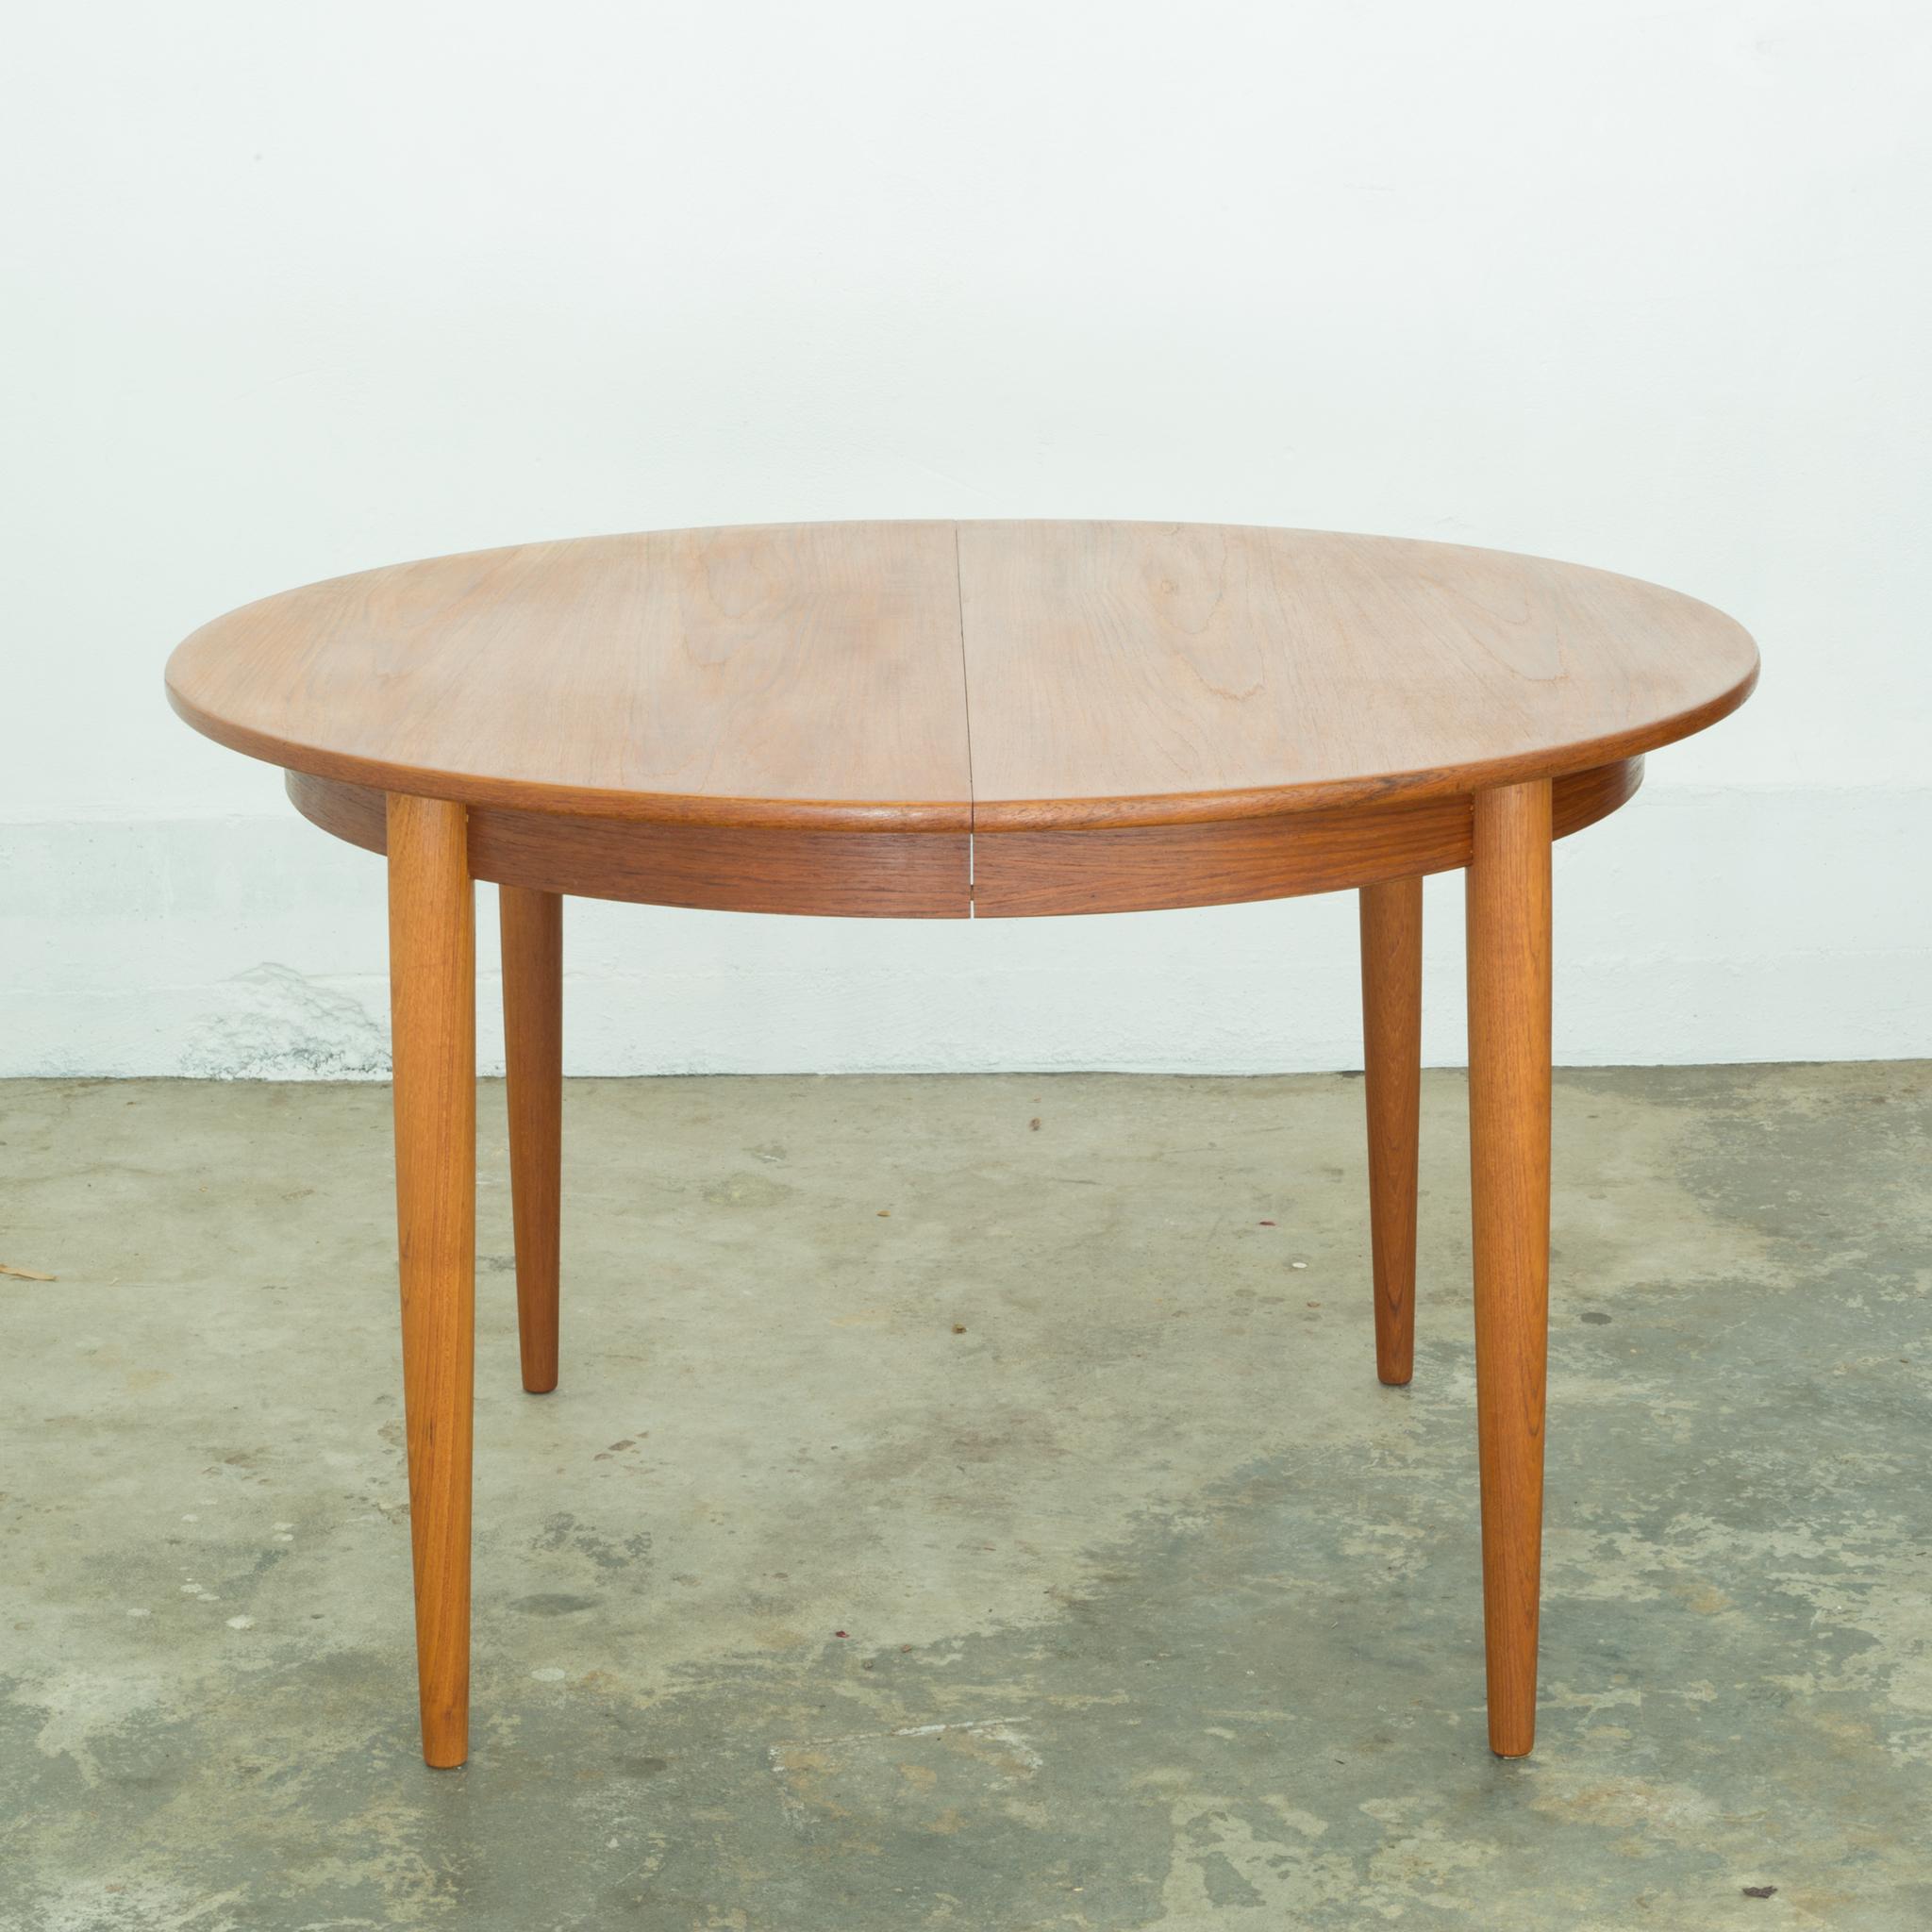 20th Century Danish Midcentury Round to Oval Dining Table by Gudme Mobelfabrik, circa 1960s